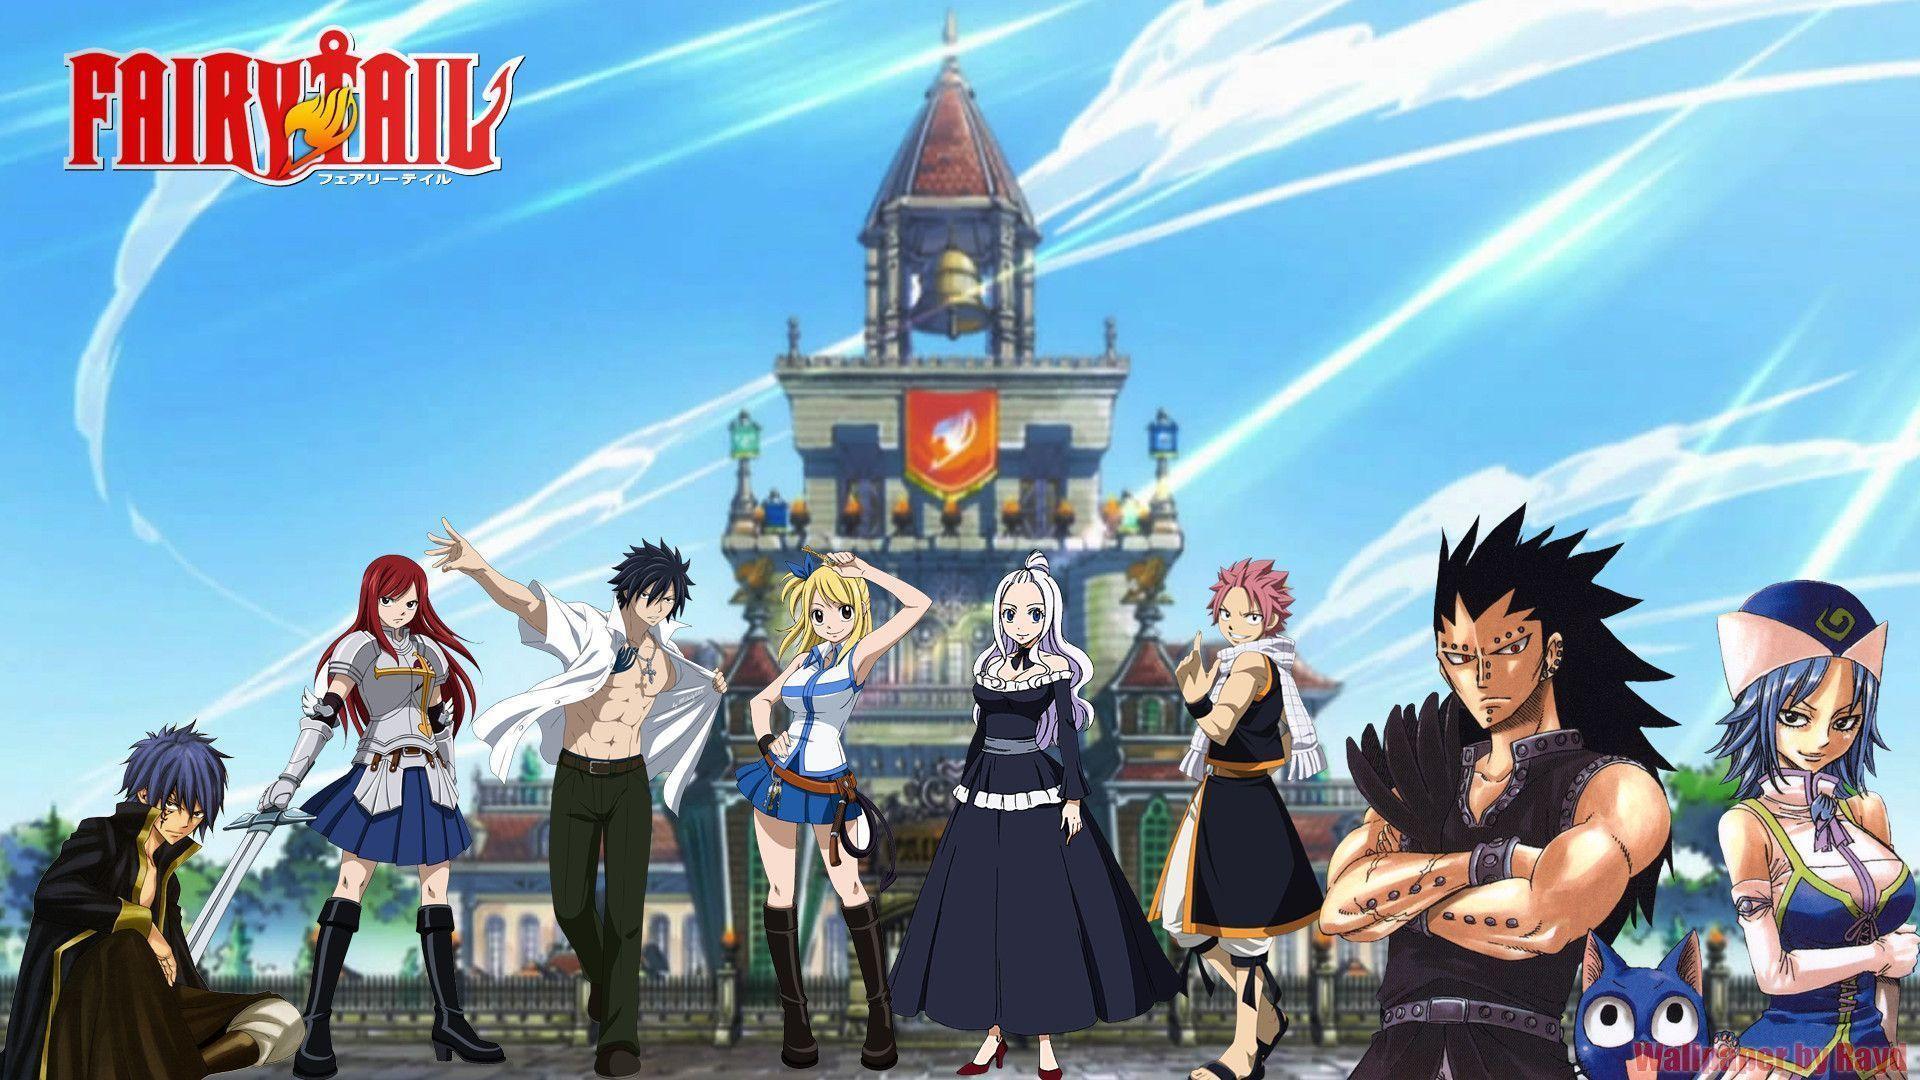 Fairy Tail Wallpapers 1920x1080 px Free Download